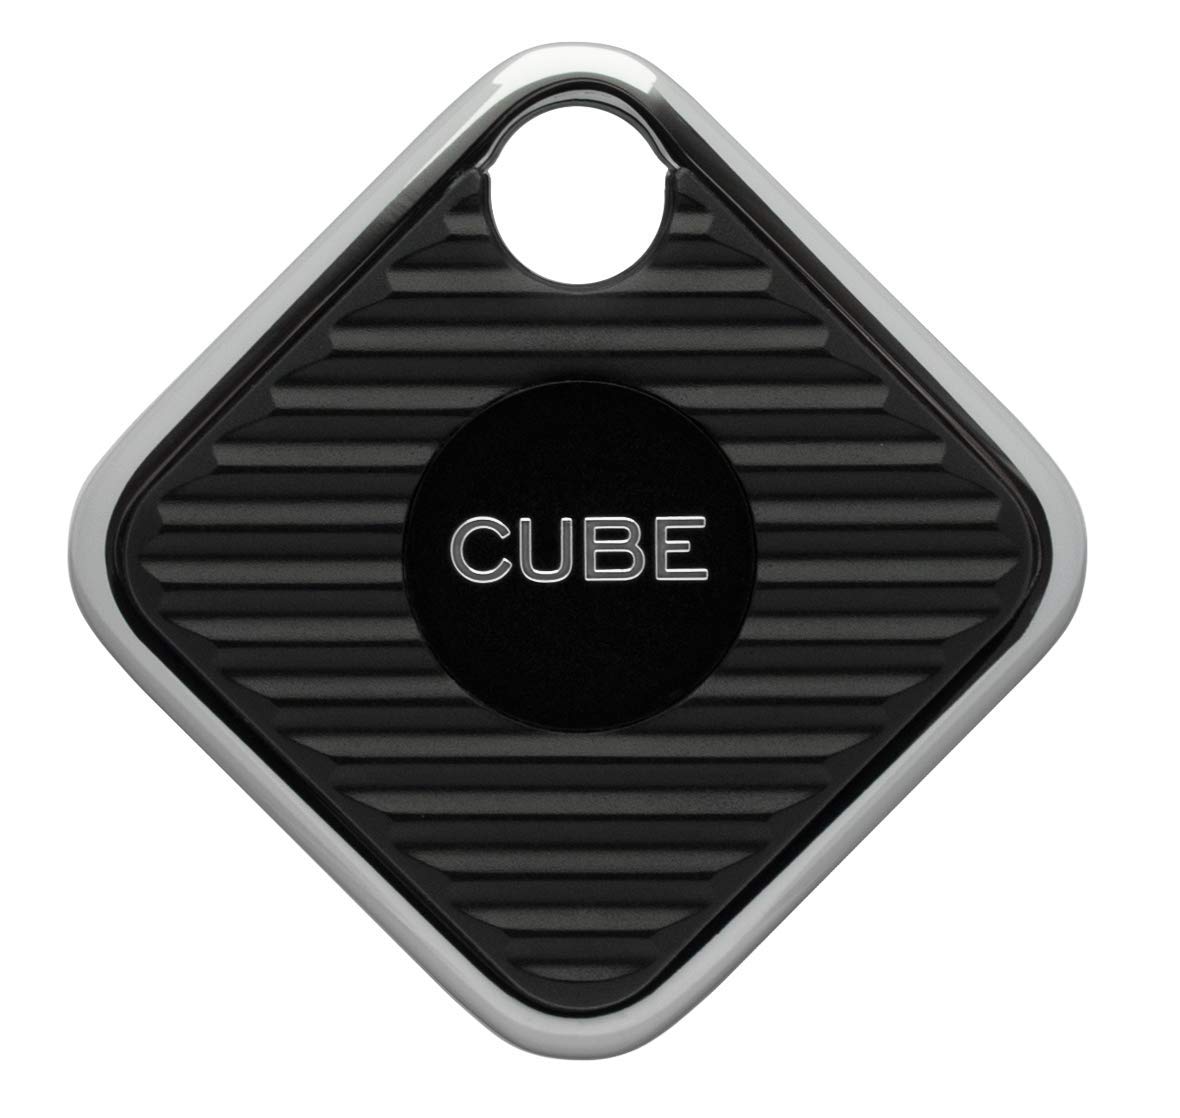 Cube Pro Key Finder Locator Smart Bluetooth Tracker for Kids, Cat, Dog Tracker, Wallet Tracker, Remote Finder, Luggage Tracker Waterproof Tracking Devices + Phone App, Replaceable Battery